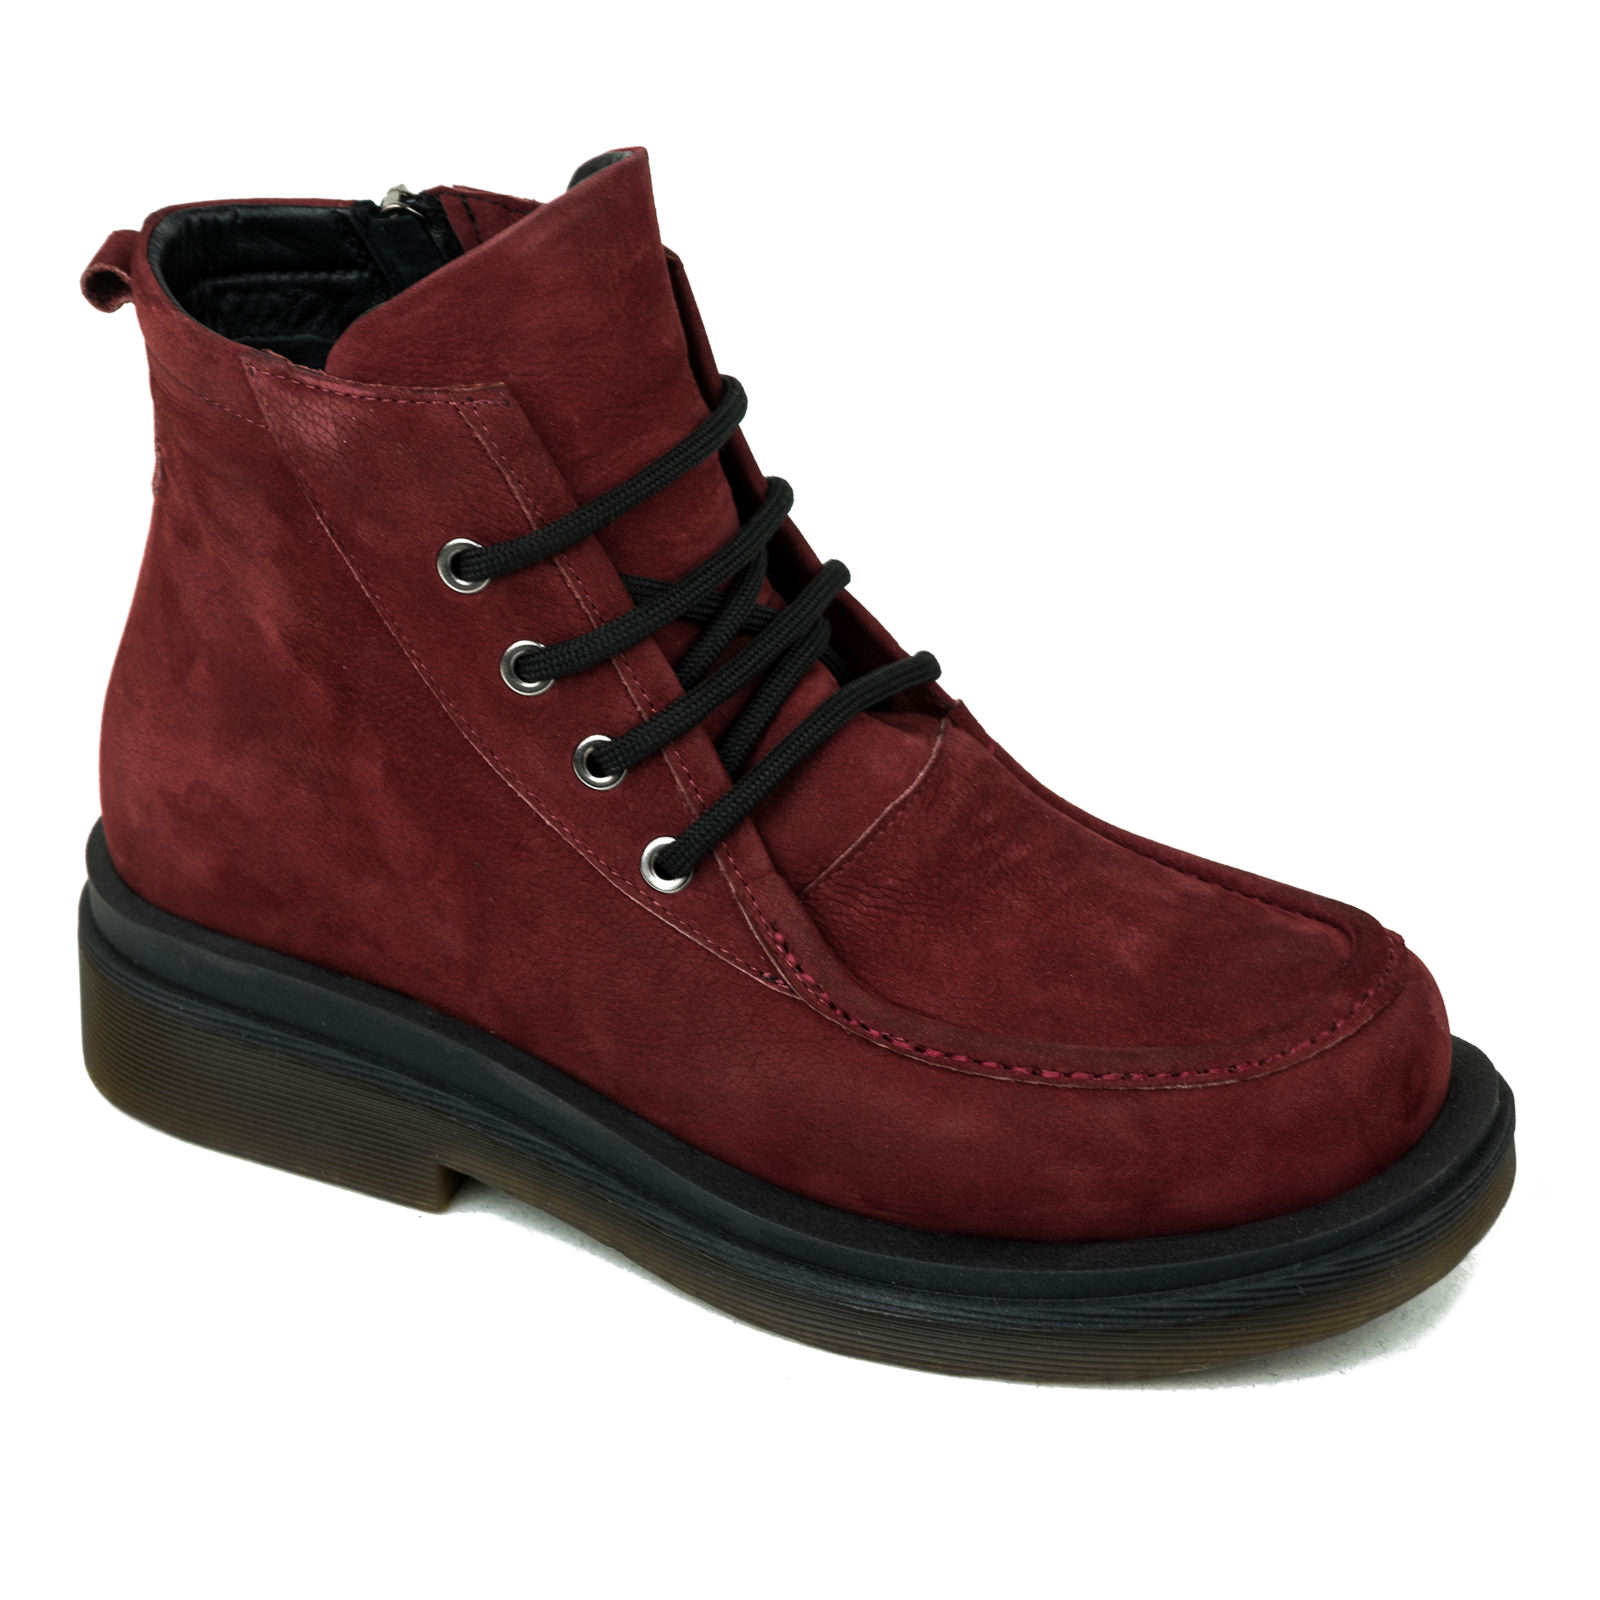 Leather ankle boots B057 - WINE RED